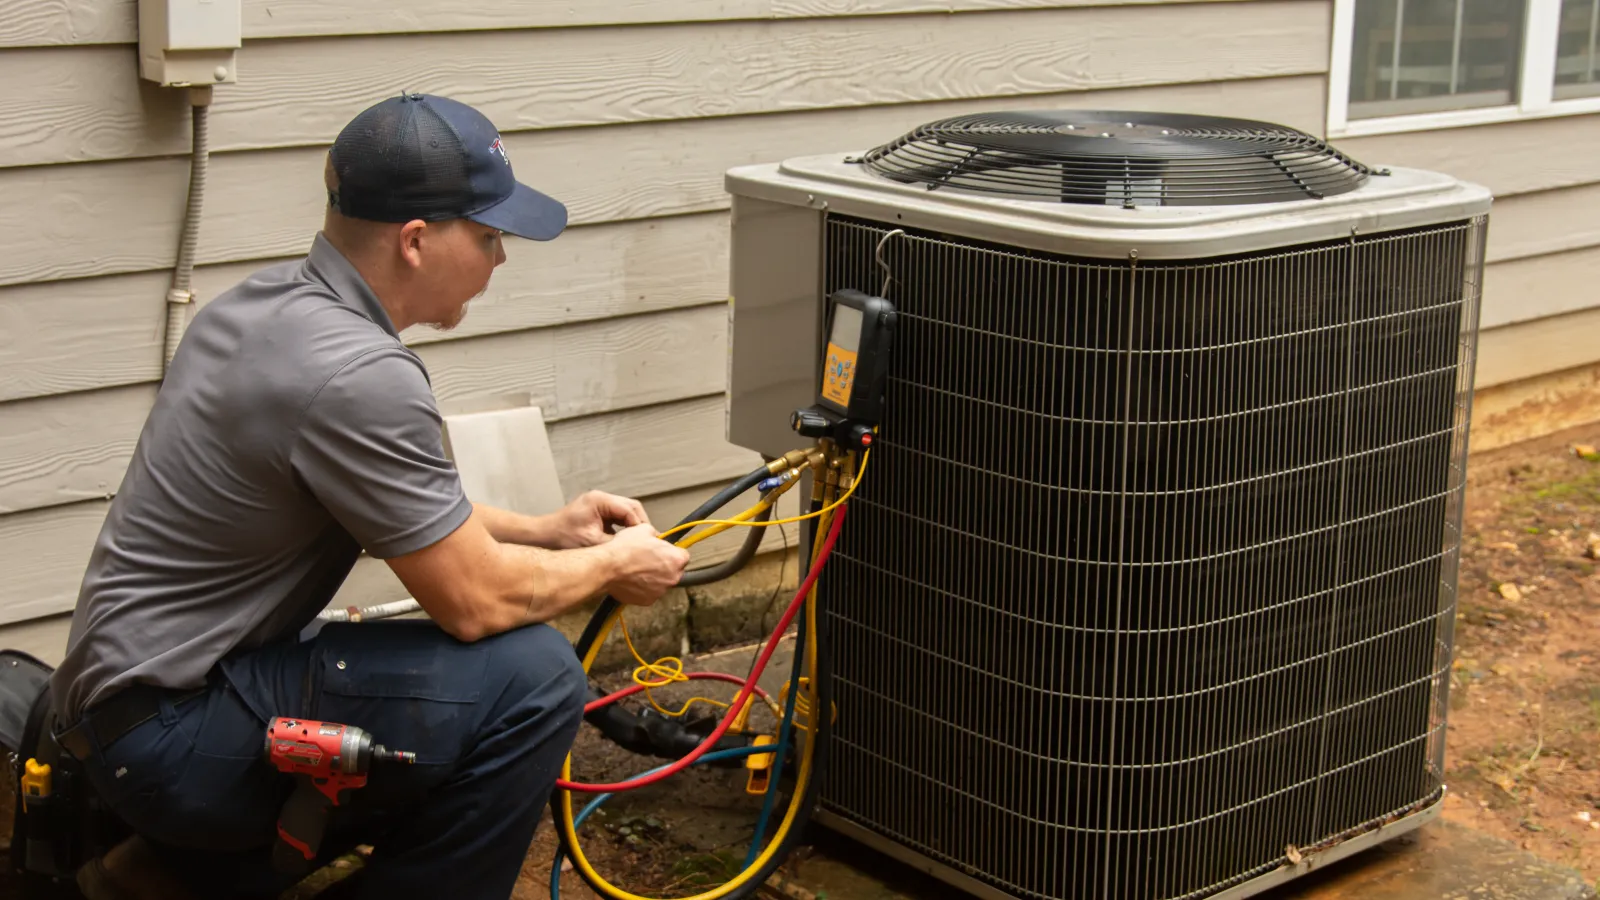 Don't Sweat It: Preparing Your HVAC System for Summer Heat